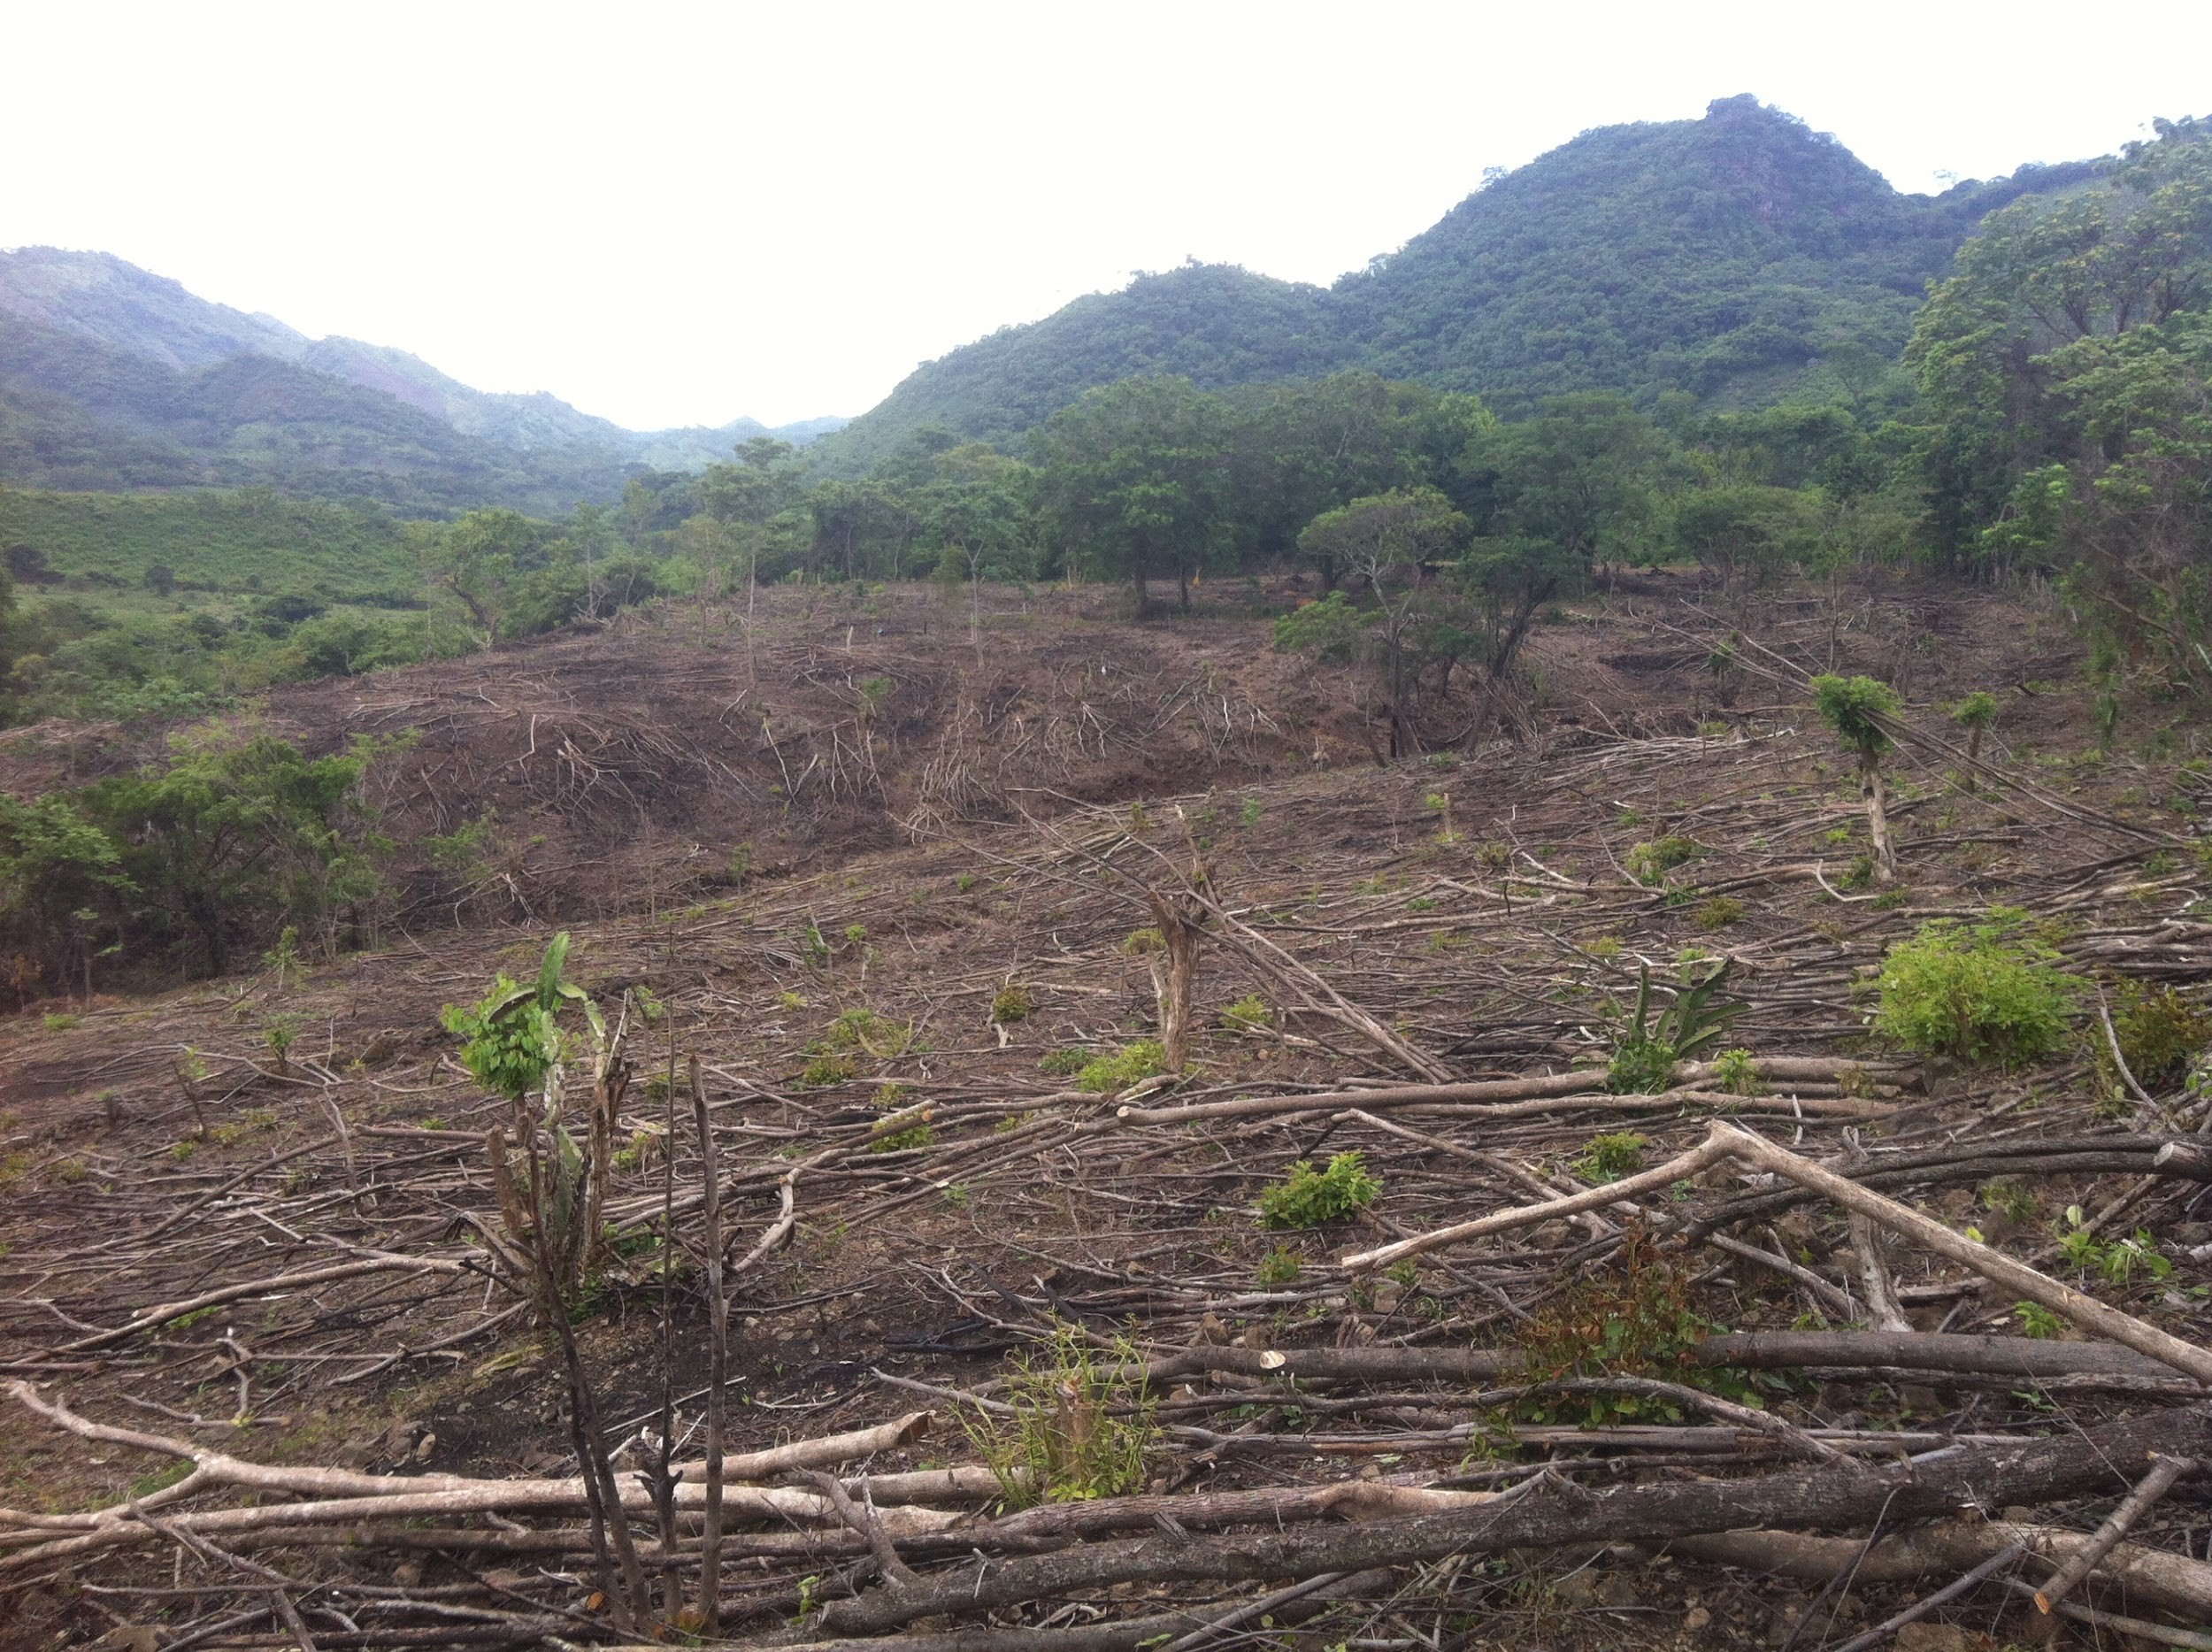 A secondary forest, cleared and burned to plant maize. The Sumpul River nearby suffers water contamination due to erosion and agrochemical runoff. The project aims to reduce slash-and-burn agriculture. Photo credit: Sean Kearney, ABES Project